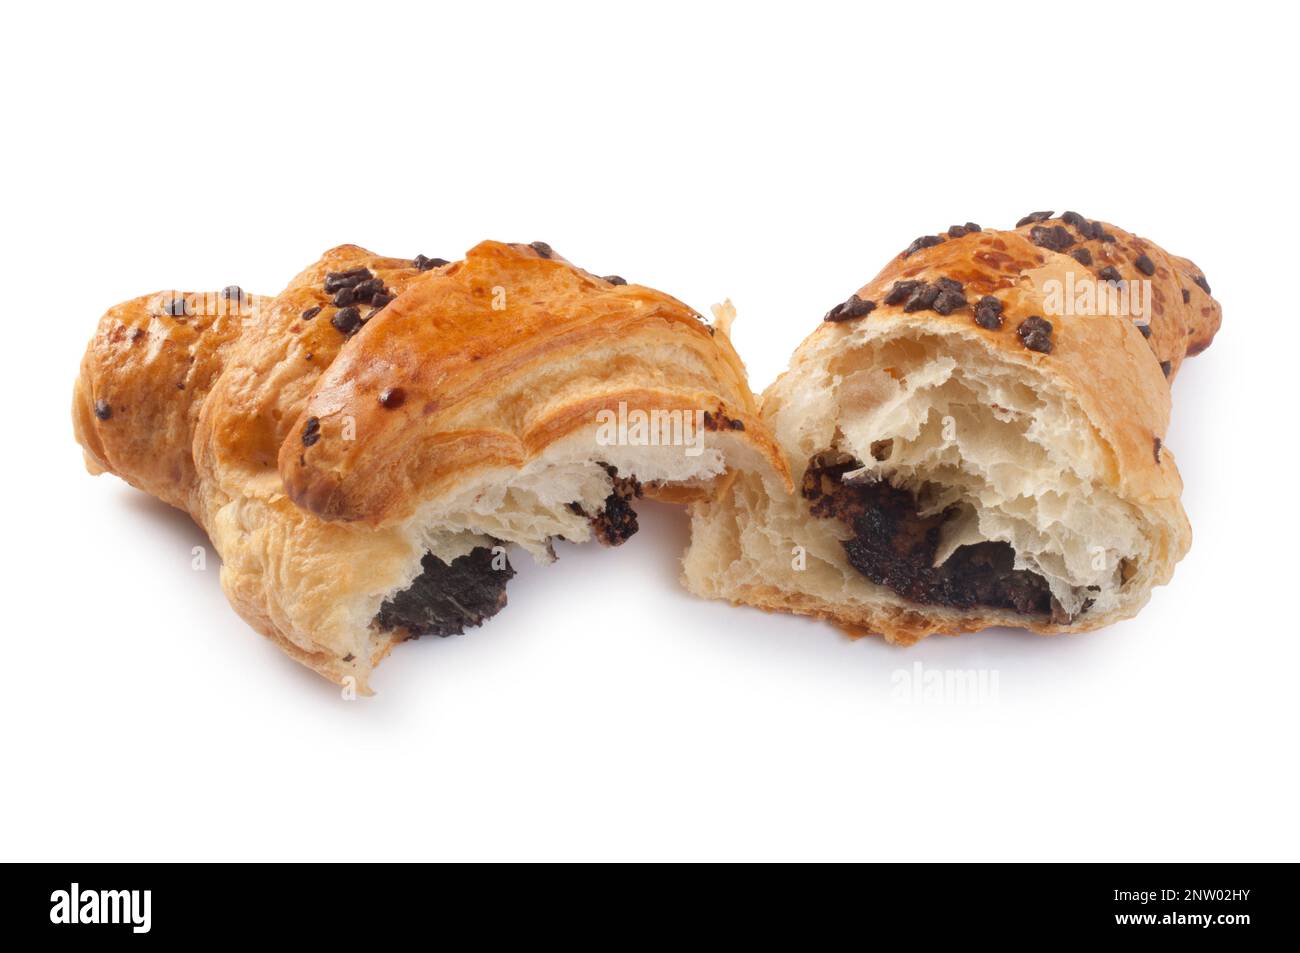 Studio shot of chocolate chip croissant cut out against a white background - John Gollop Stock Photo